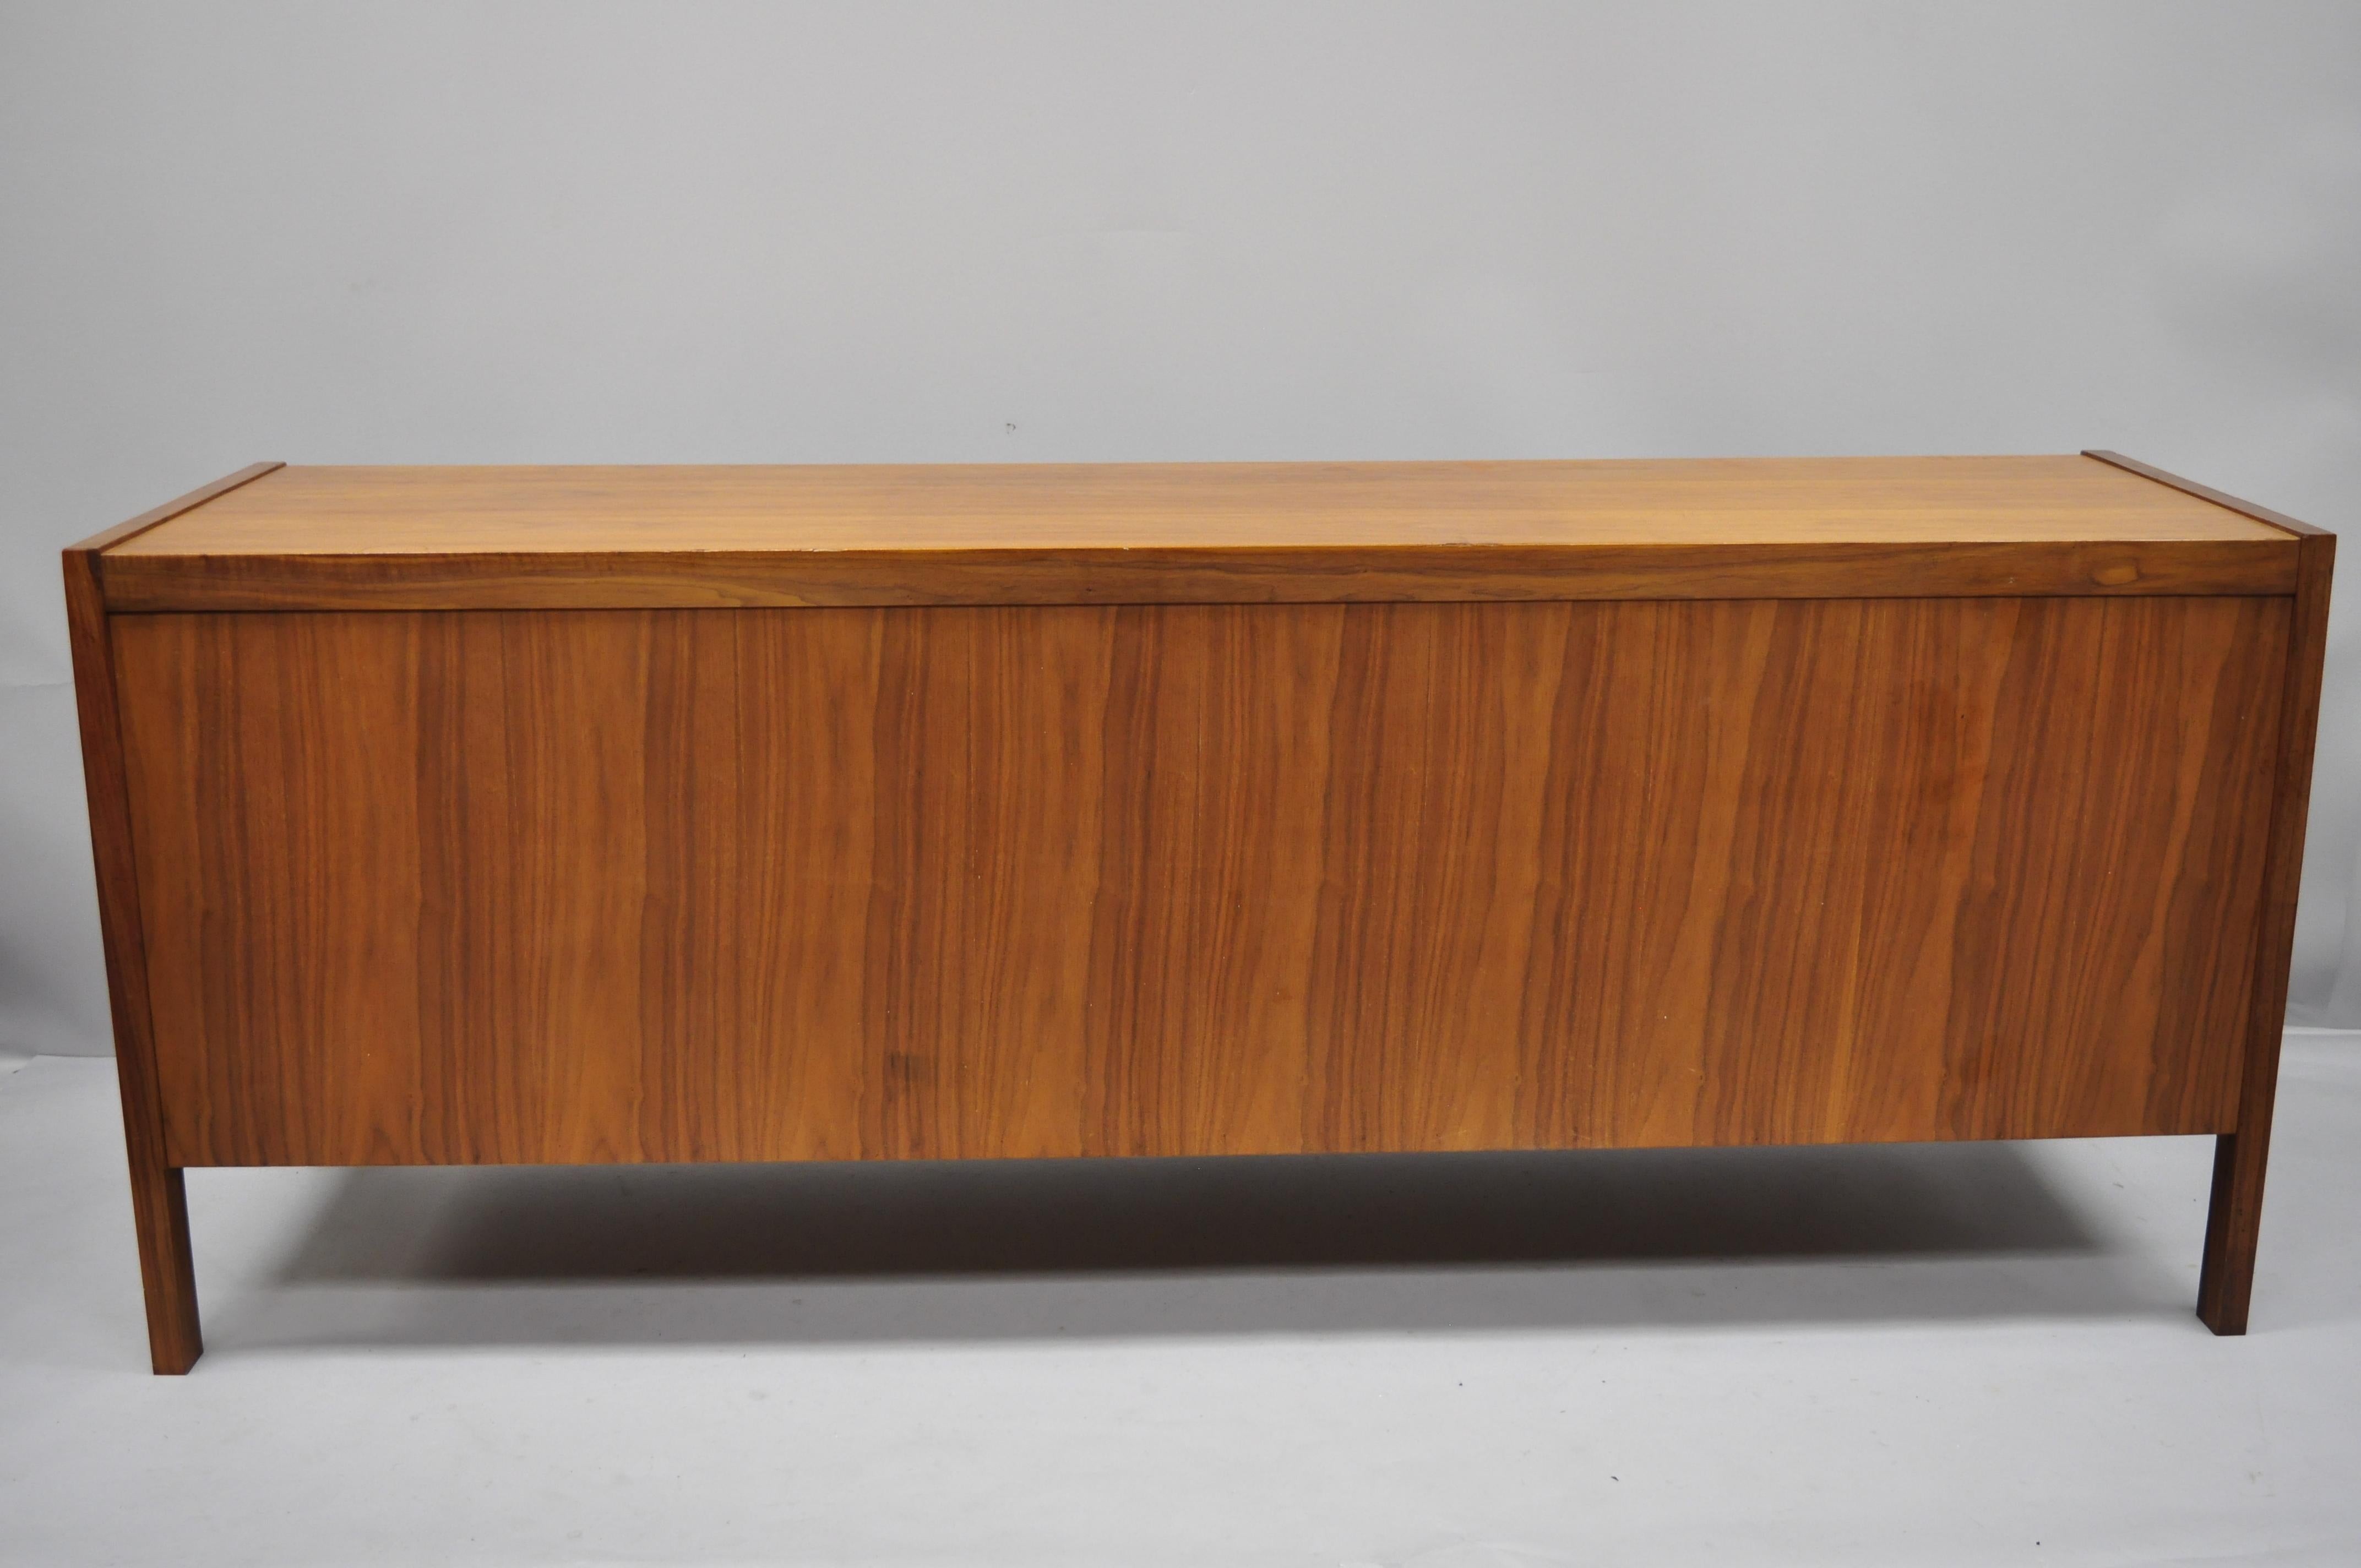 20th Century Walnut & Teak Knoll Style Credenza Cabinet Attributed to Stow Davis